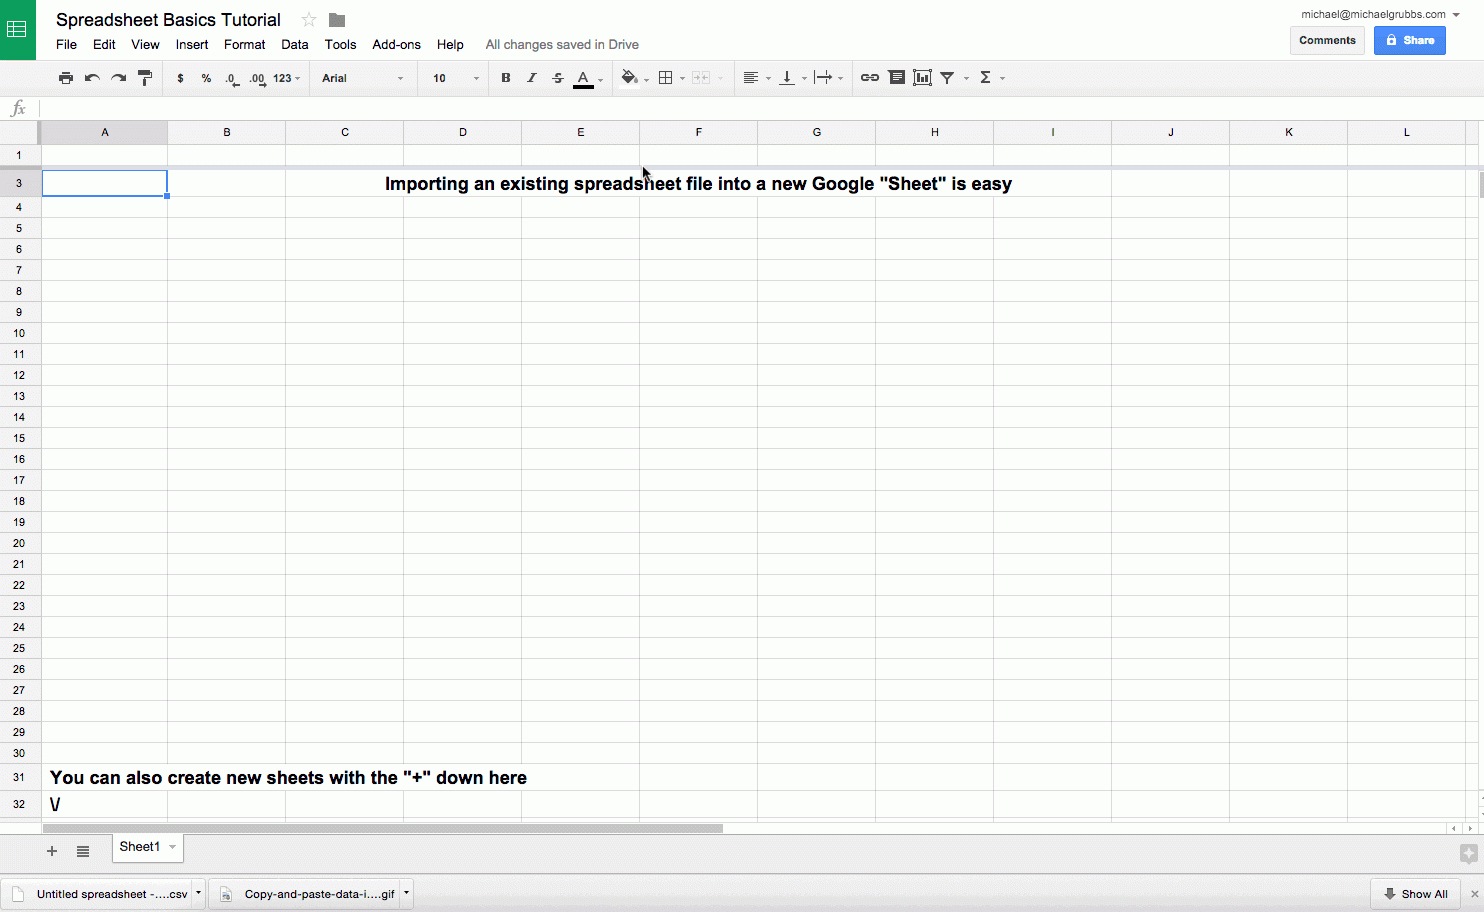 Quick Online Spreadsheet For Google Sheets 101: The Beginner's Guide To Online Spreadsheets  The